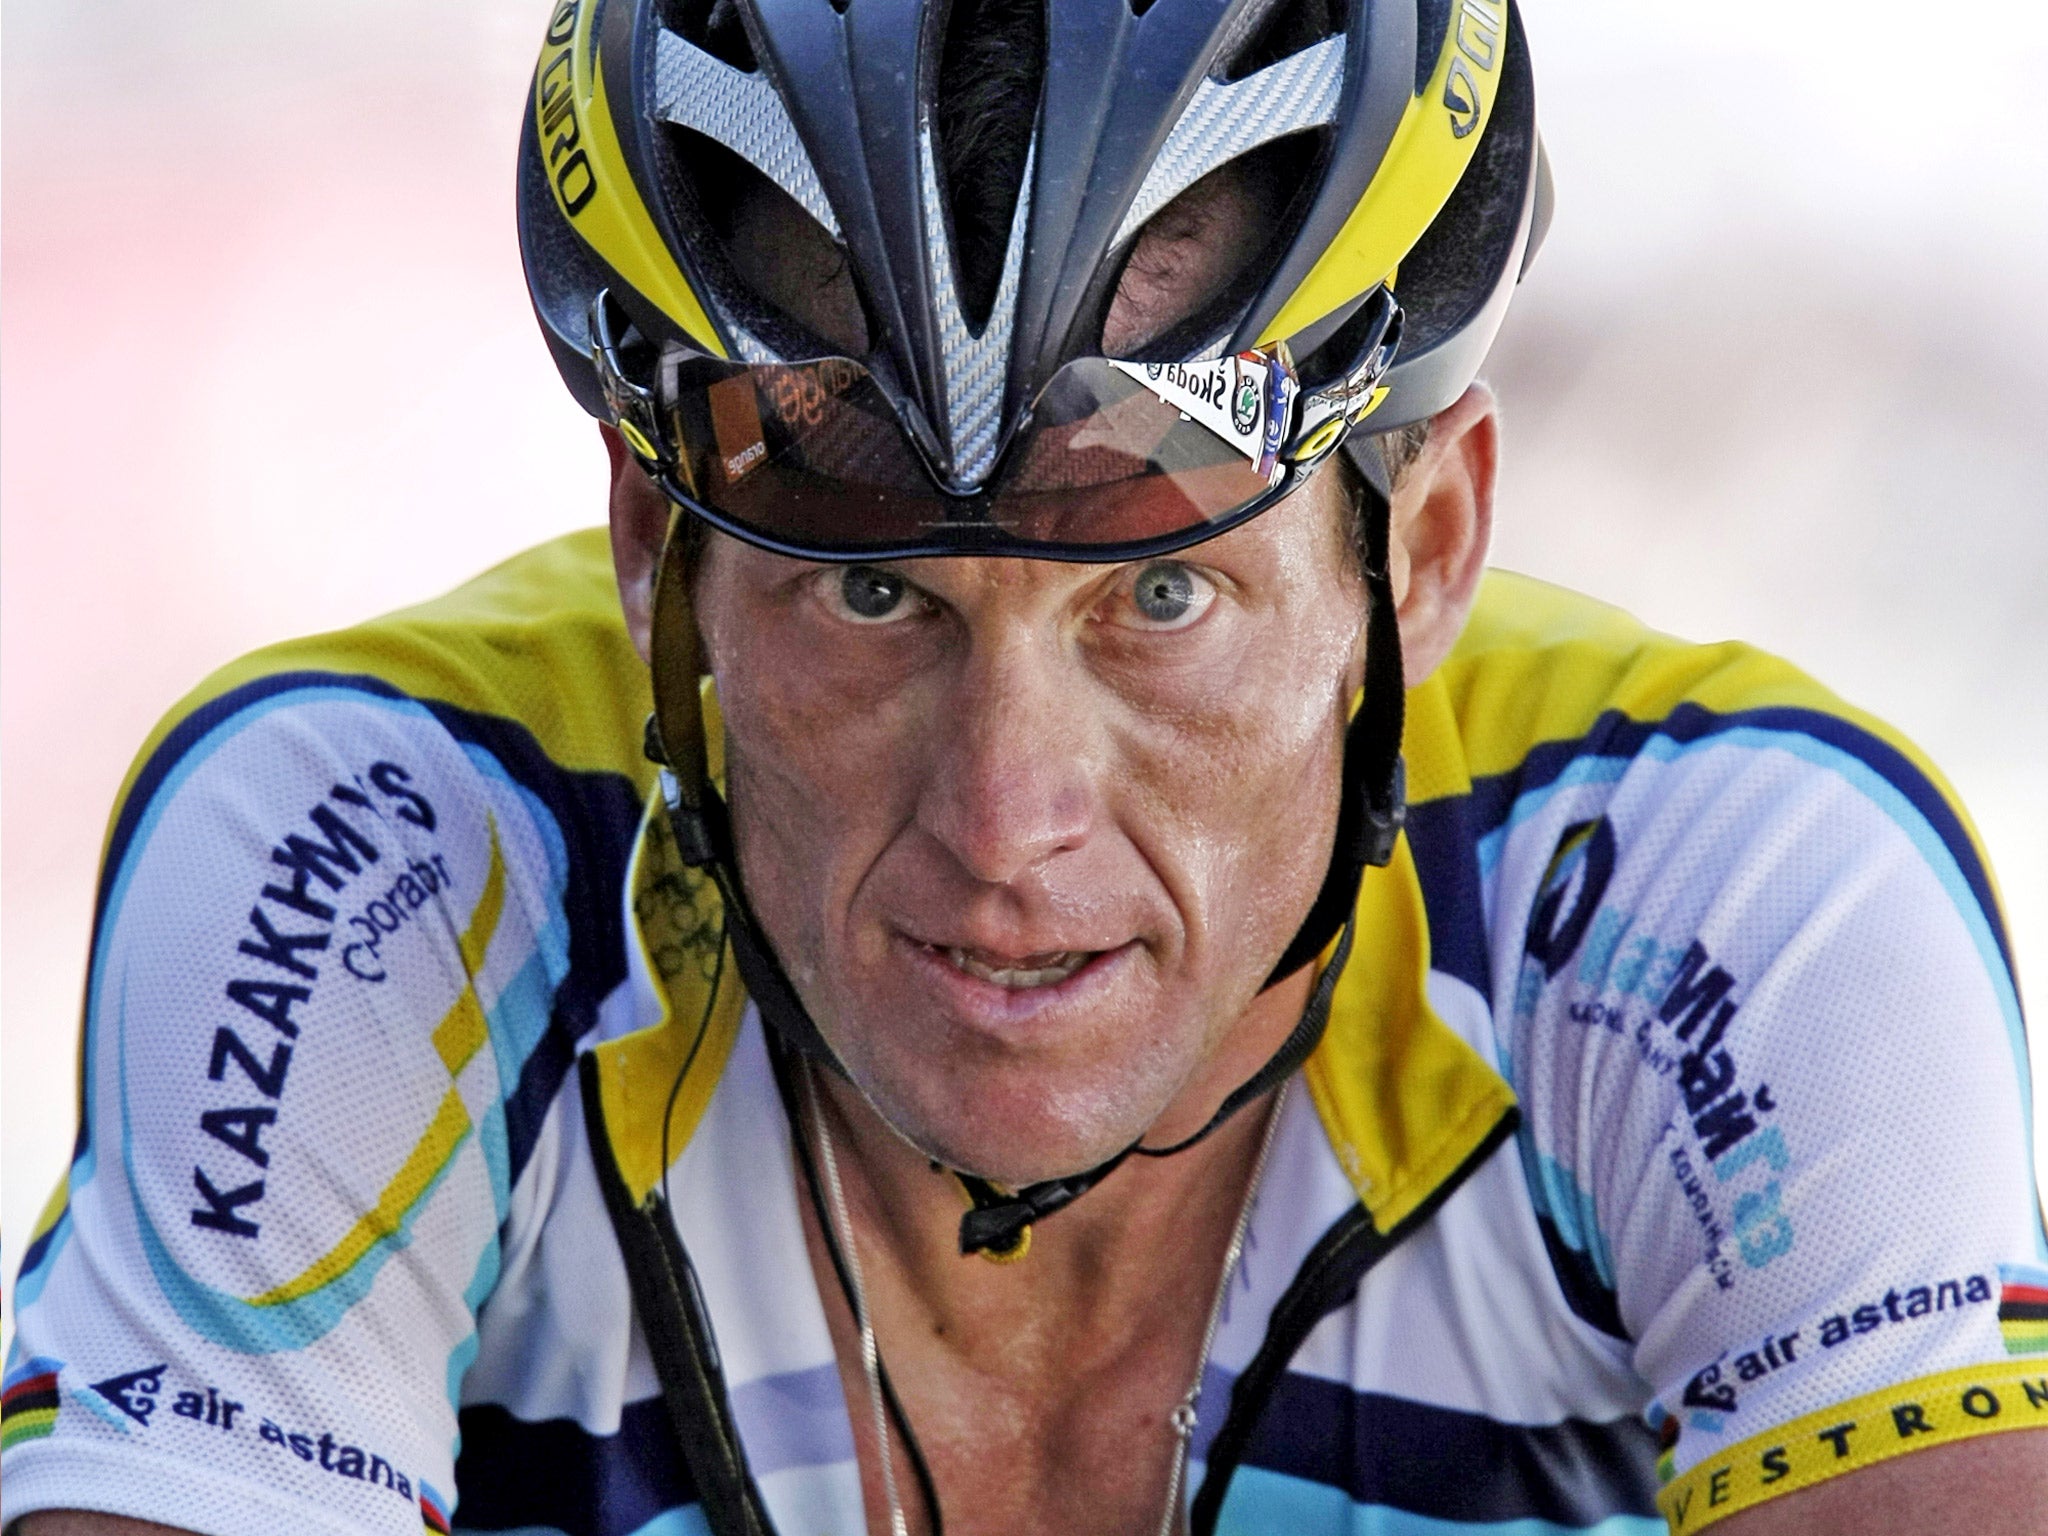 Lance Armstrong said his life ban was like being 'publicly lynched' and wants 'equal treatment'